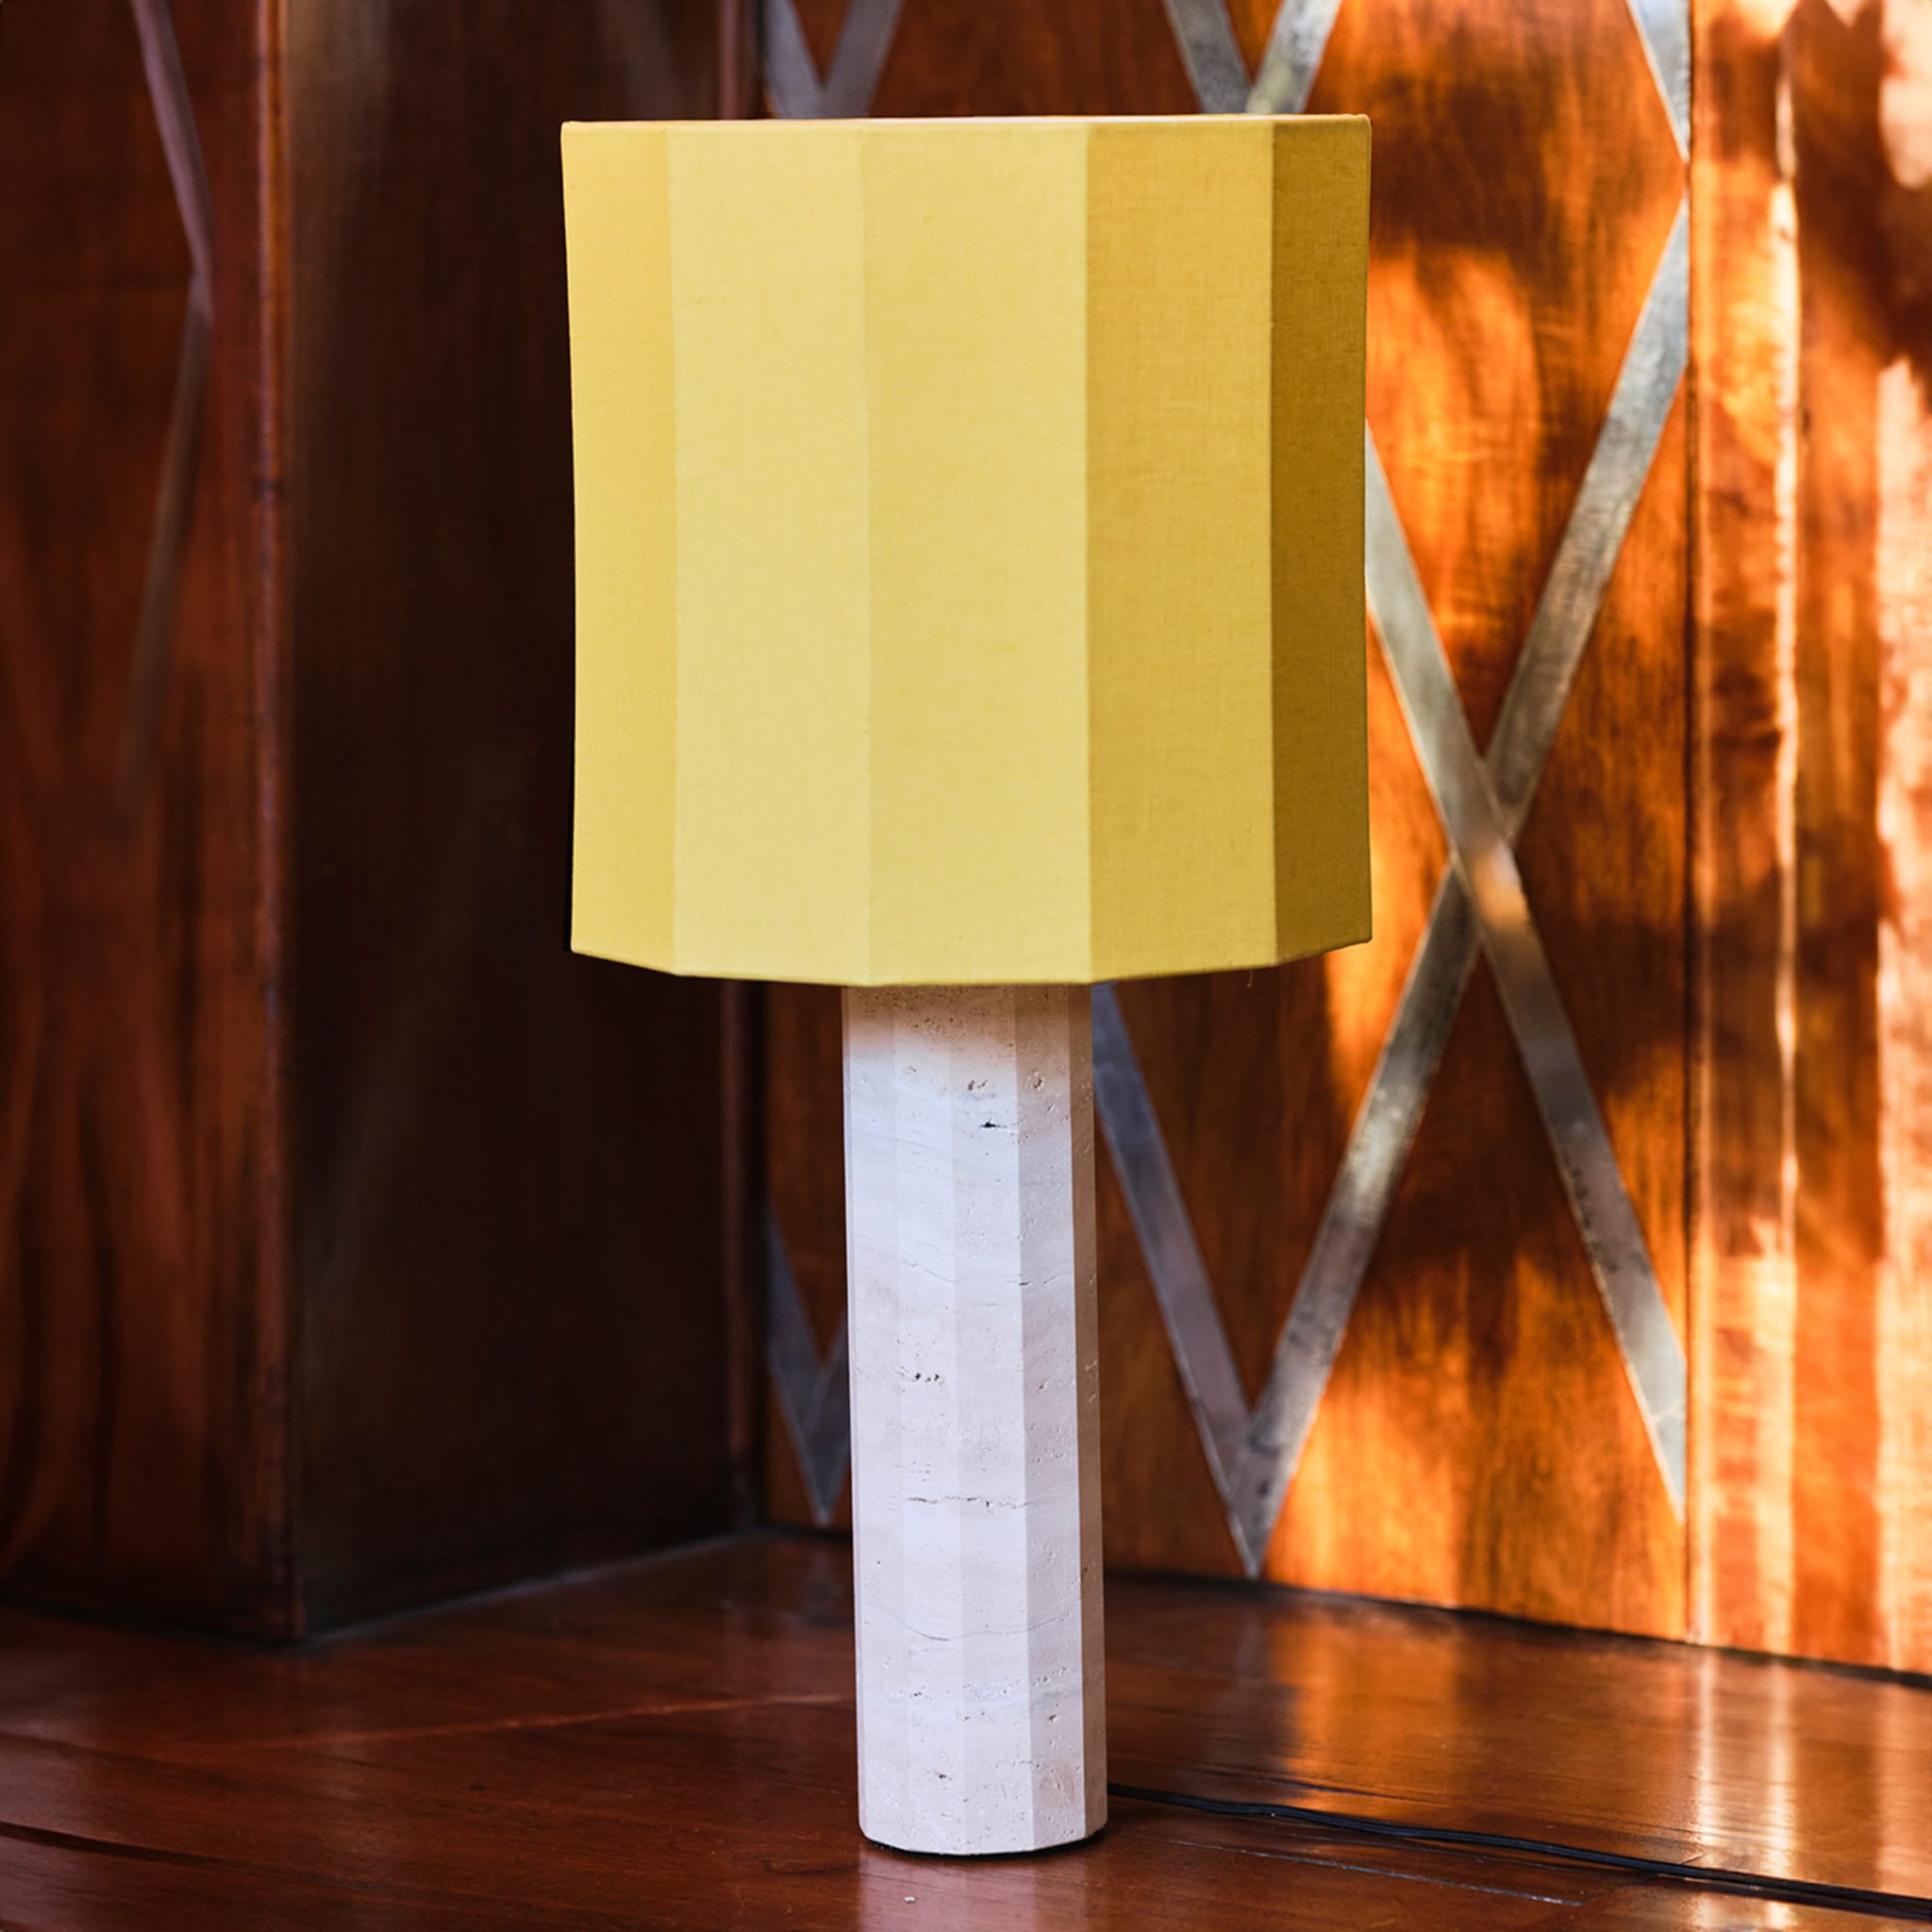 Roma Dodecagon Large Yellow Table Lamp - Alternative view 3